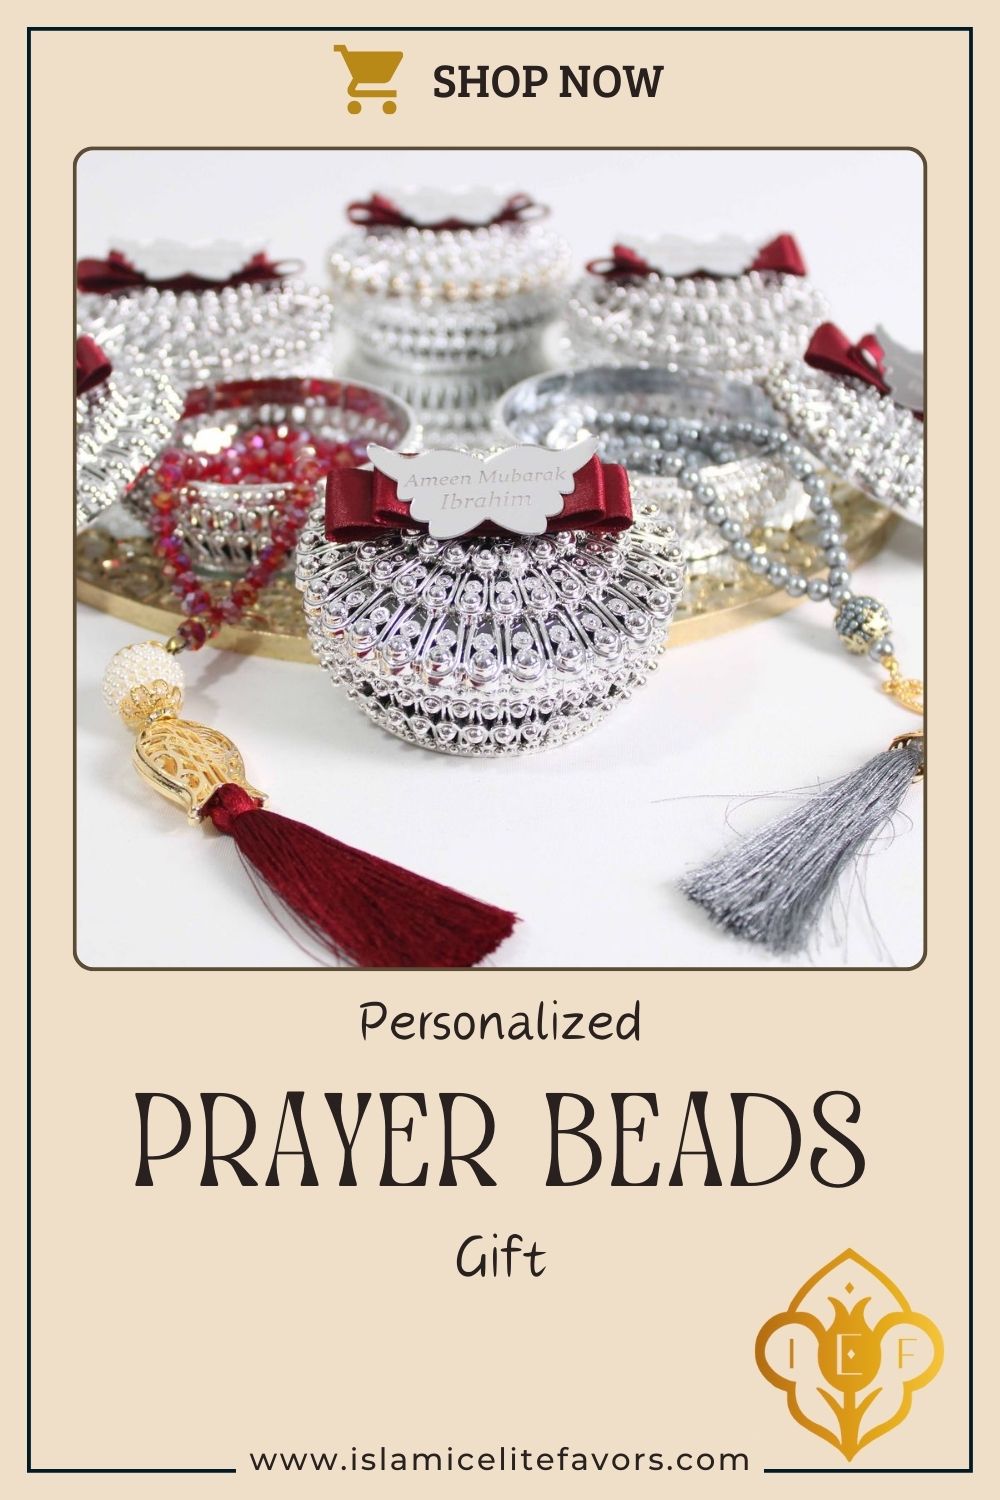 Personalized Crystal Prayer Beads Tasbeeh Masbaha Wedding Favors - Islamic Elite Favors is a handmade gift shop offering a wide variety of unique and personalized gifts for all occasions. Whether you're looking for the perfect Ramadan, Eid, Hajj, wedding gift or something special for a birthday, baby shower or anniversary, we have something for everyone. High quality, made with love.